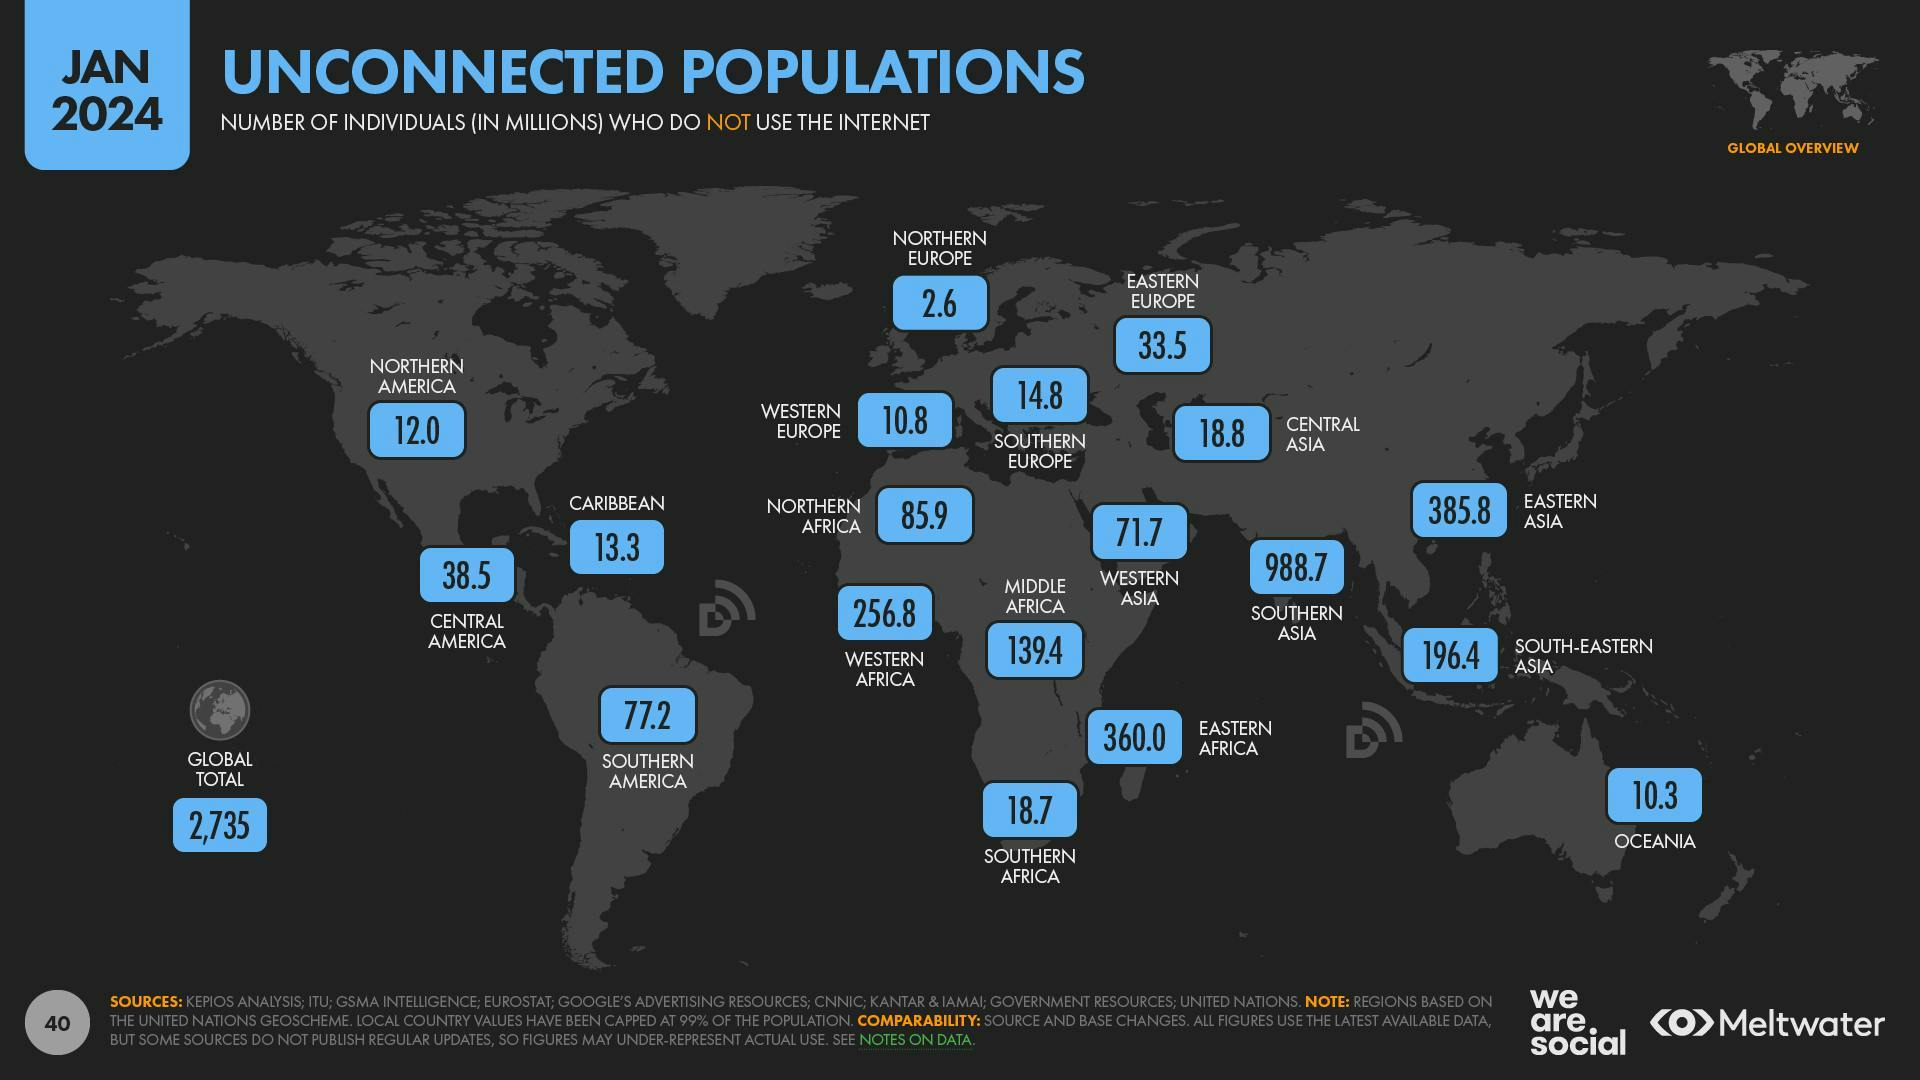 Unconnected populations